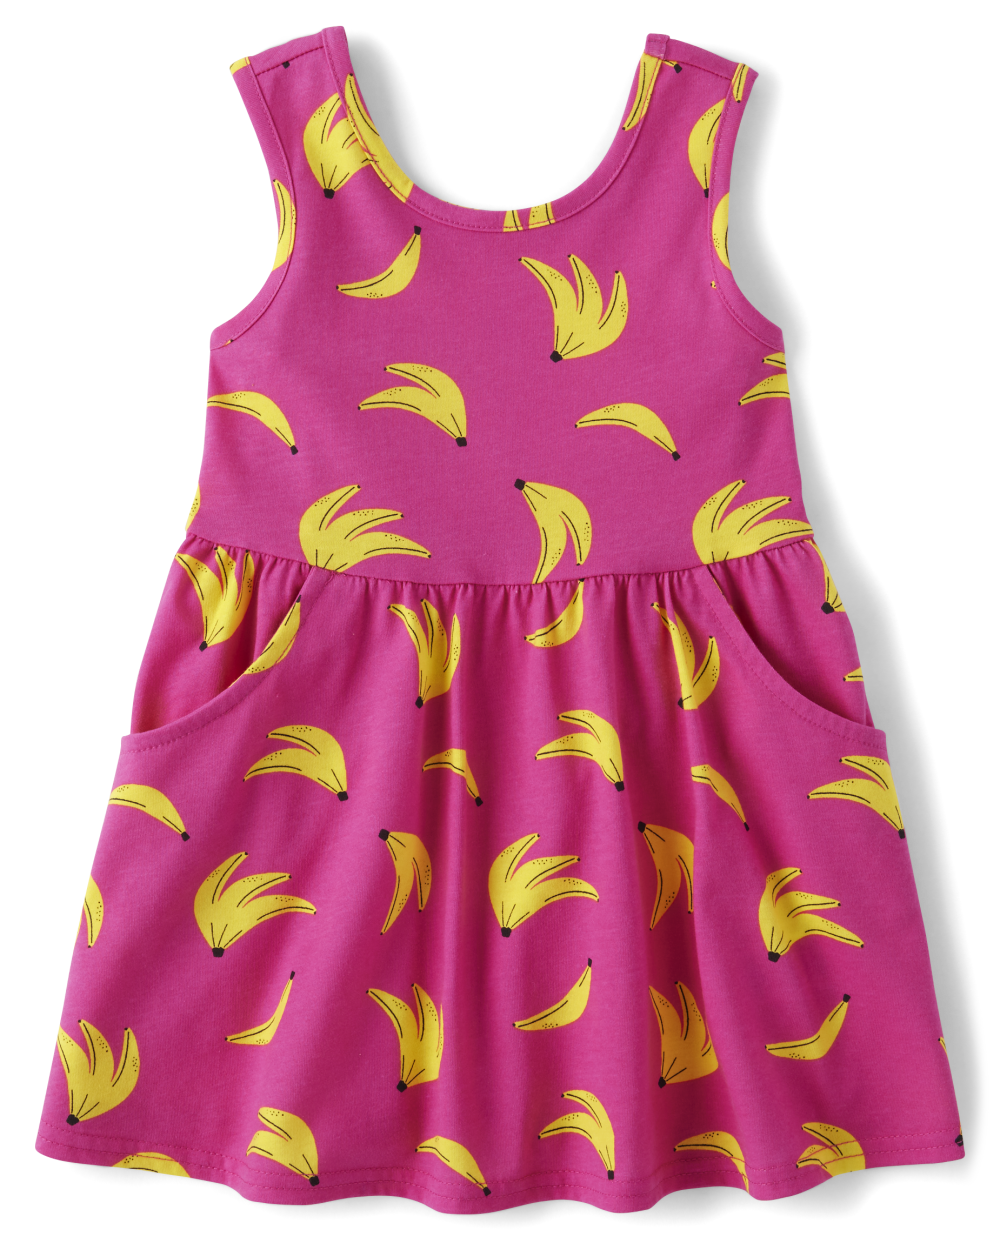 Toddler Baby General Print Above the Knee Sleeveless Tank Pocketed Scoop Neck Dress